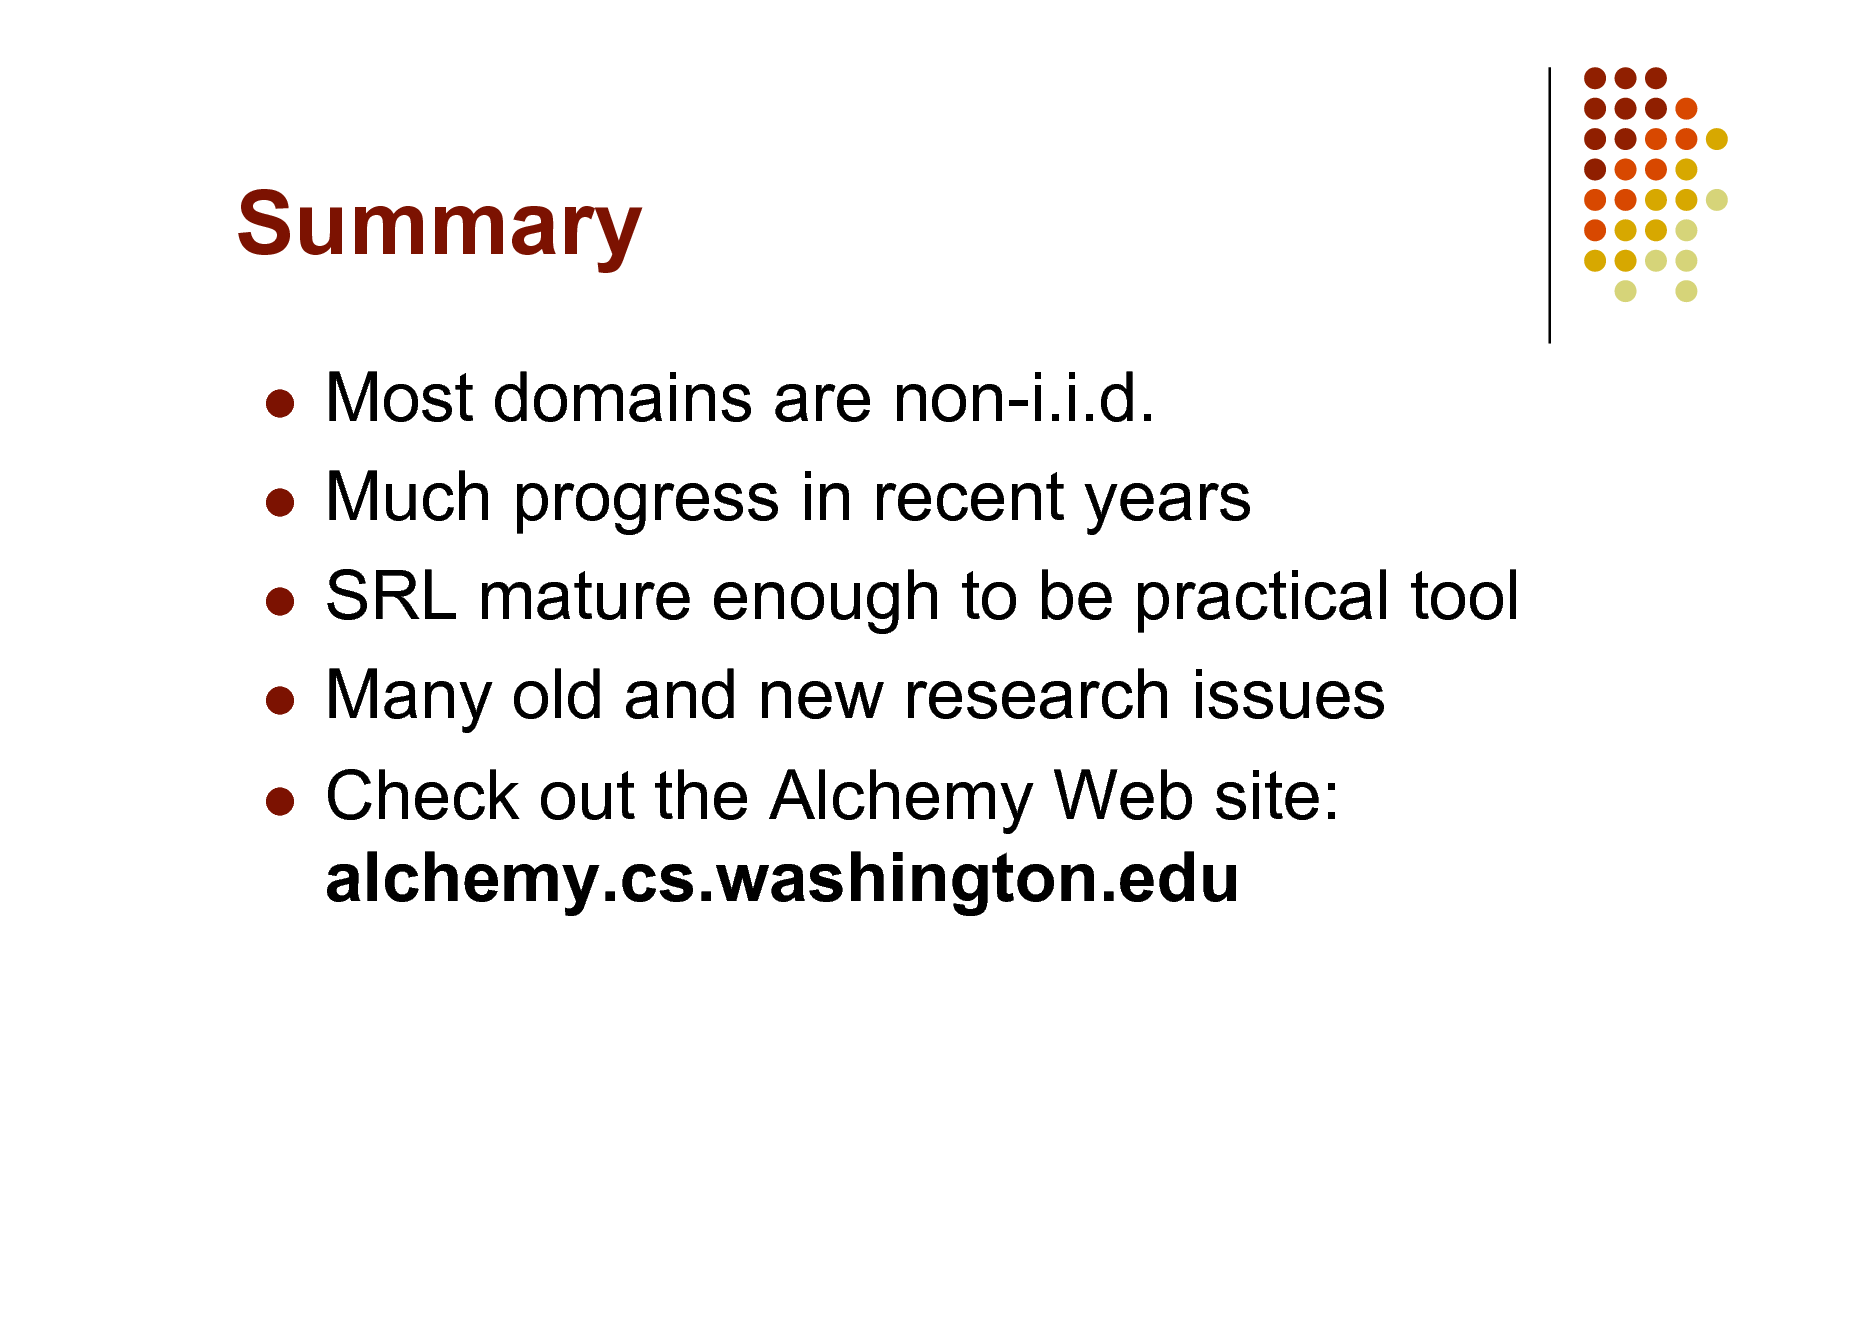 Slide: Summary
Most domains are non-i.i.d.  Much progress in recent years  SRL mature enough to be practical tool  Many old and new research issues  Check out the Alchemy Web site: alchemy.cs.washington.edu


